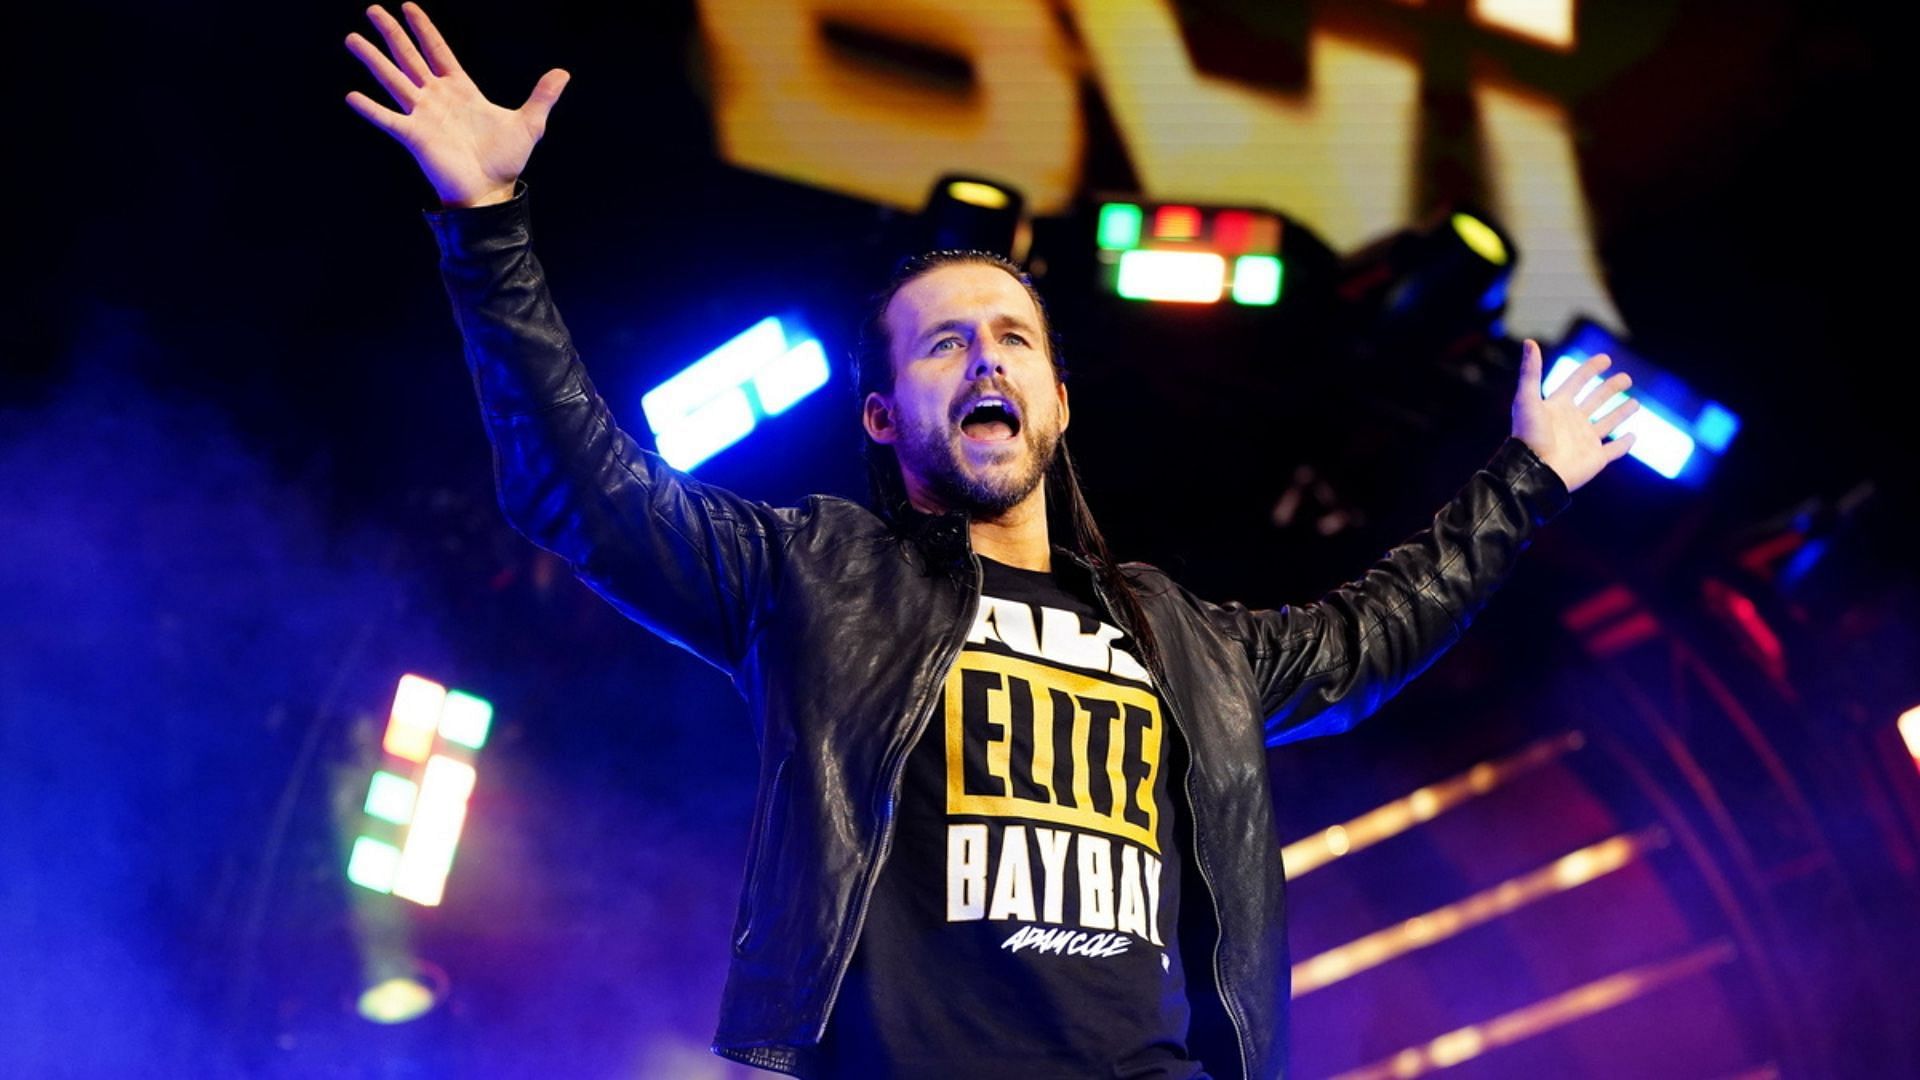 Adam Cole is currently with All Elite Wrestling